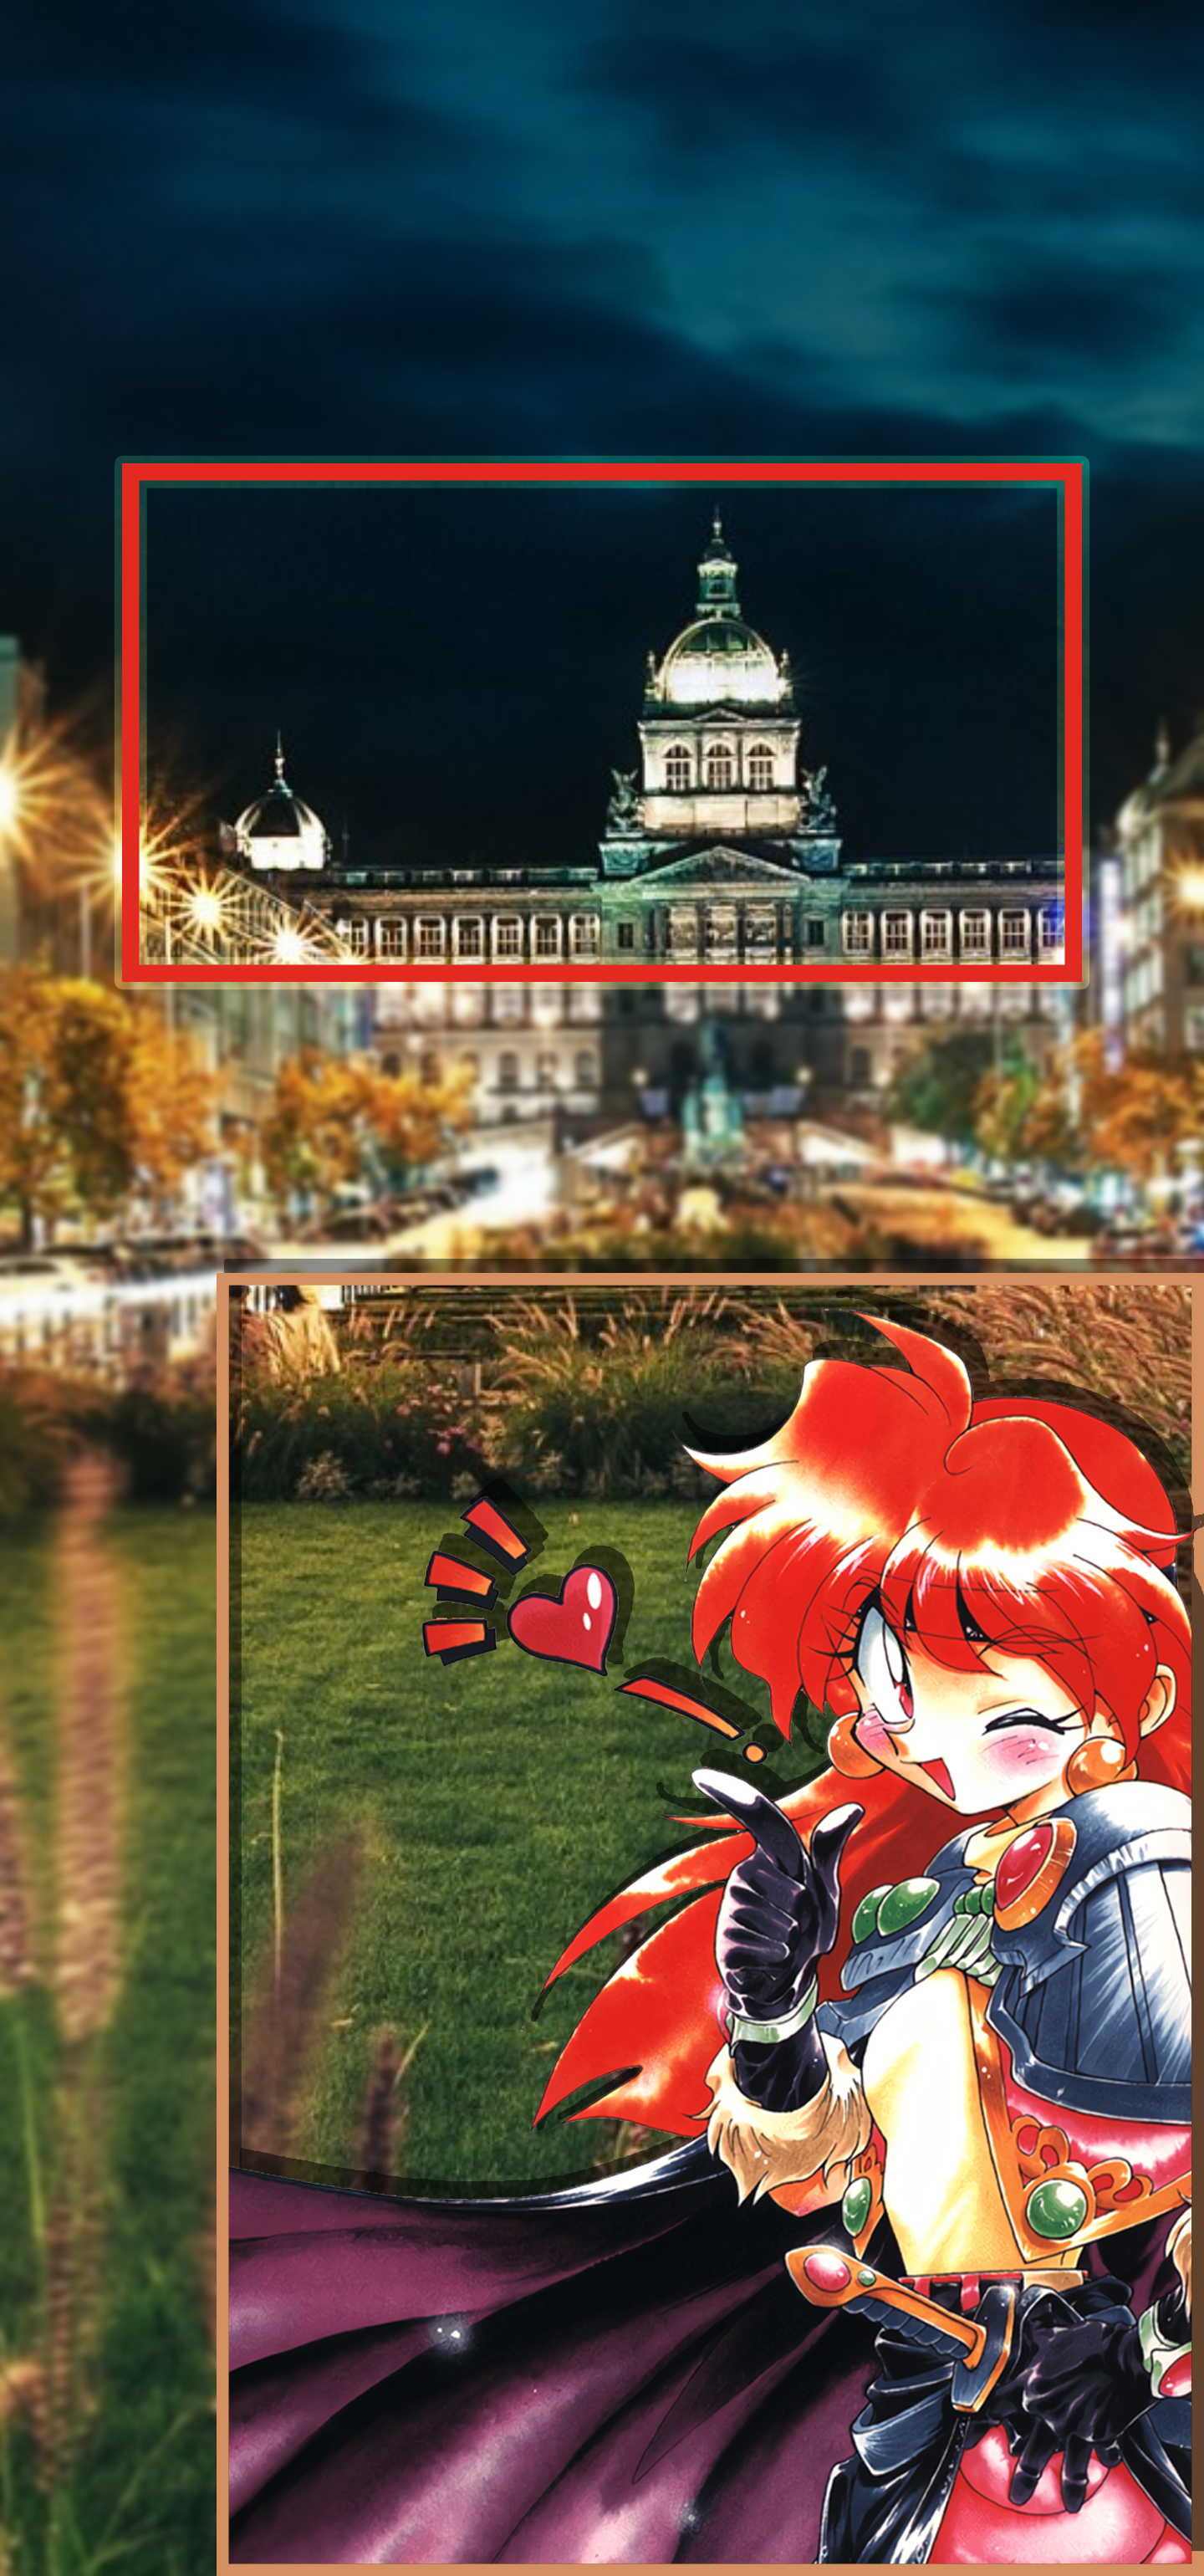 Picture In Picture Anime Girls City Night Slayers Lina Inverse Vertical Wink One Eye Closed Heart 1440x3080